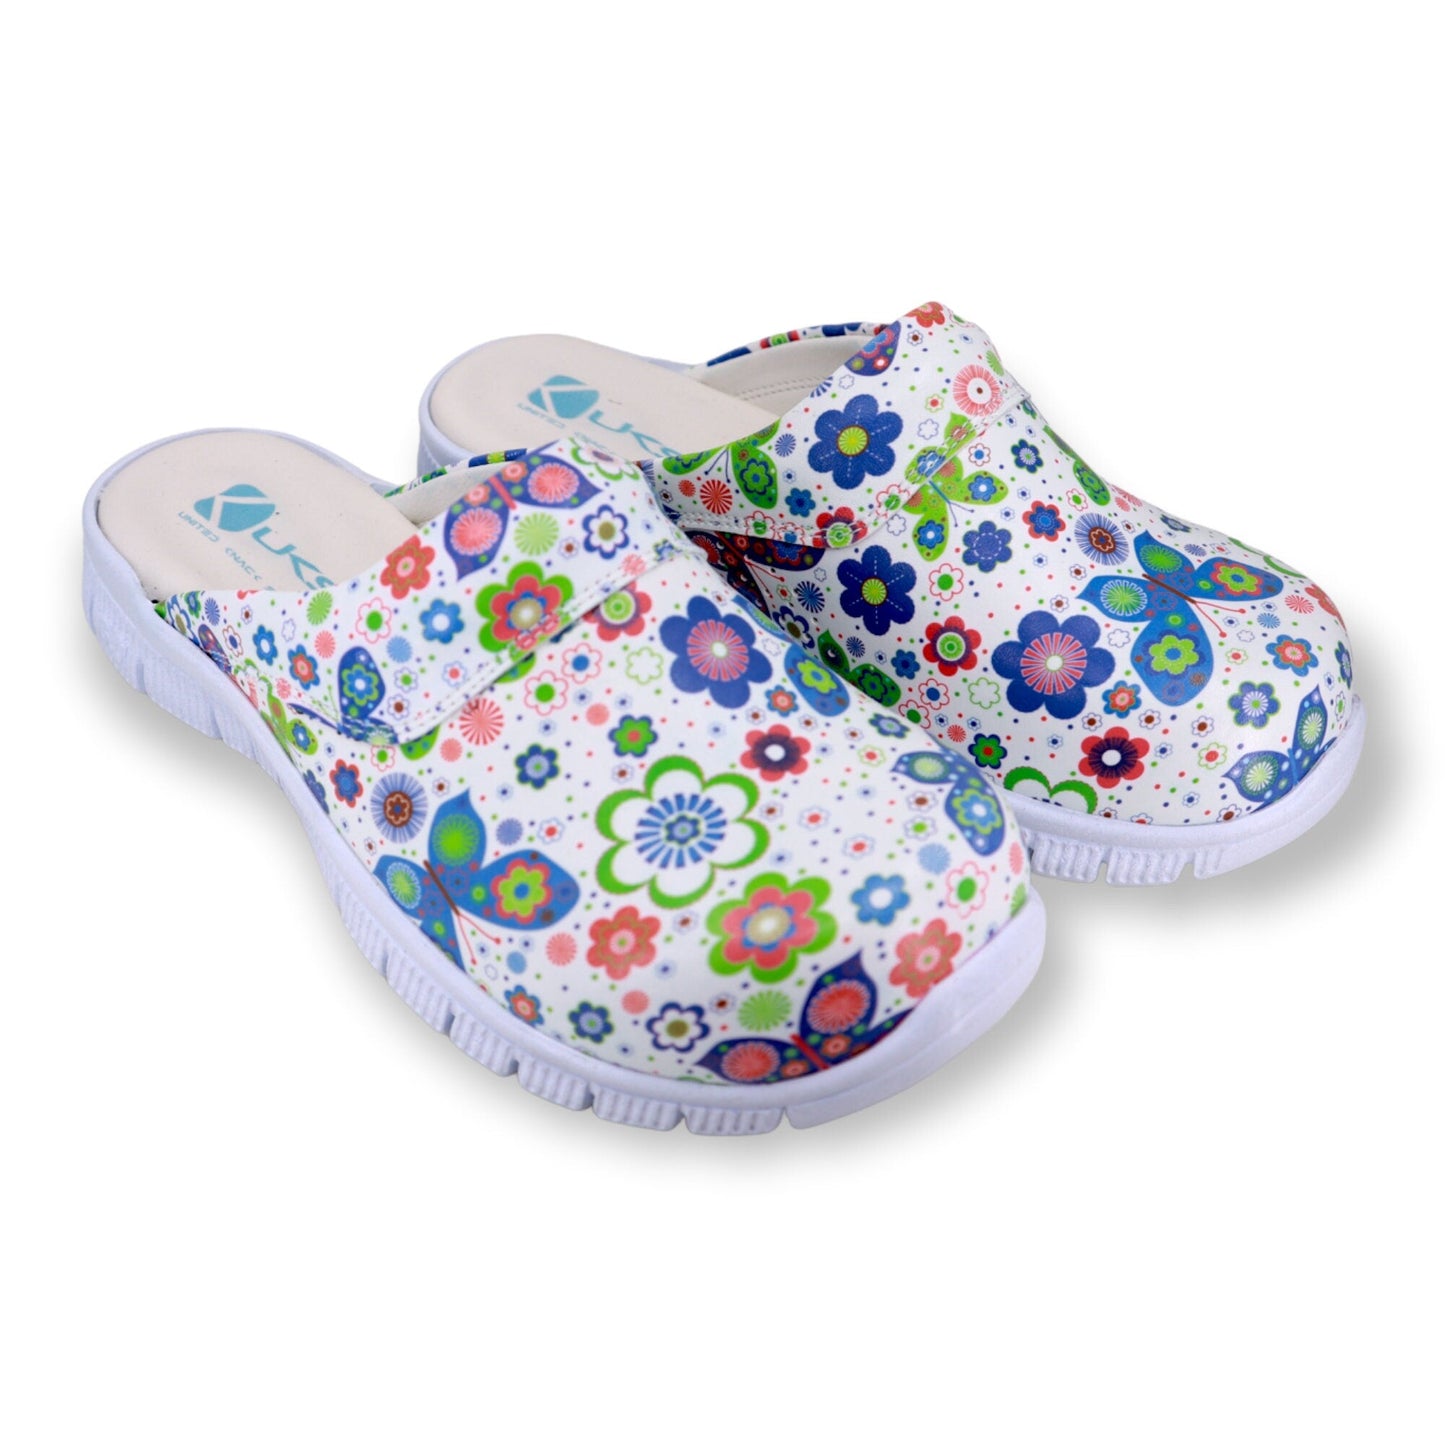 Butterfly Clomfortflex Leather Clogs Slippers